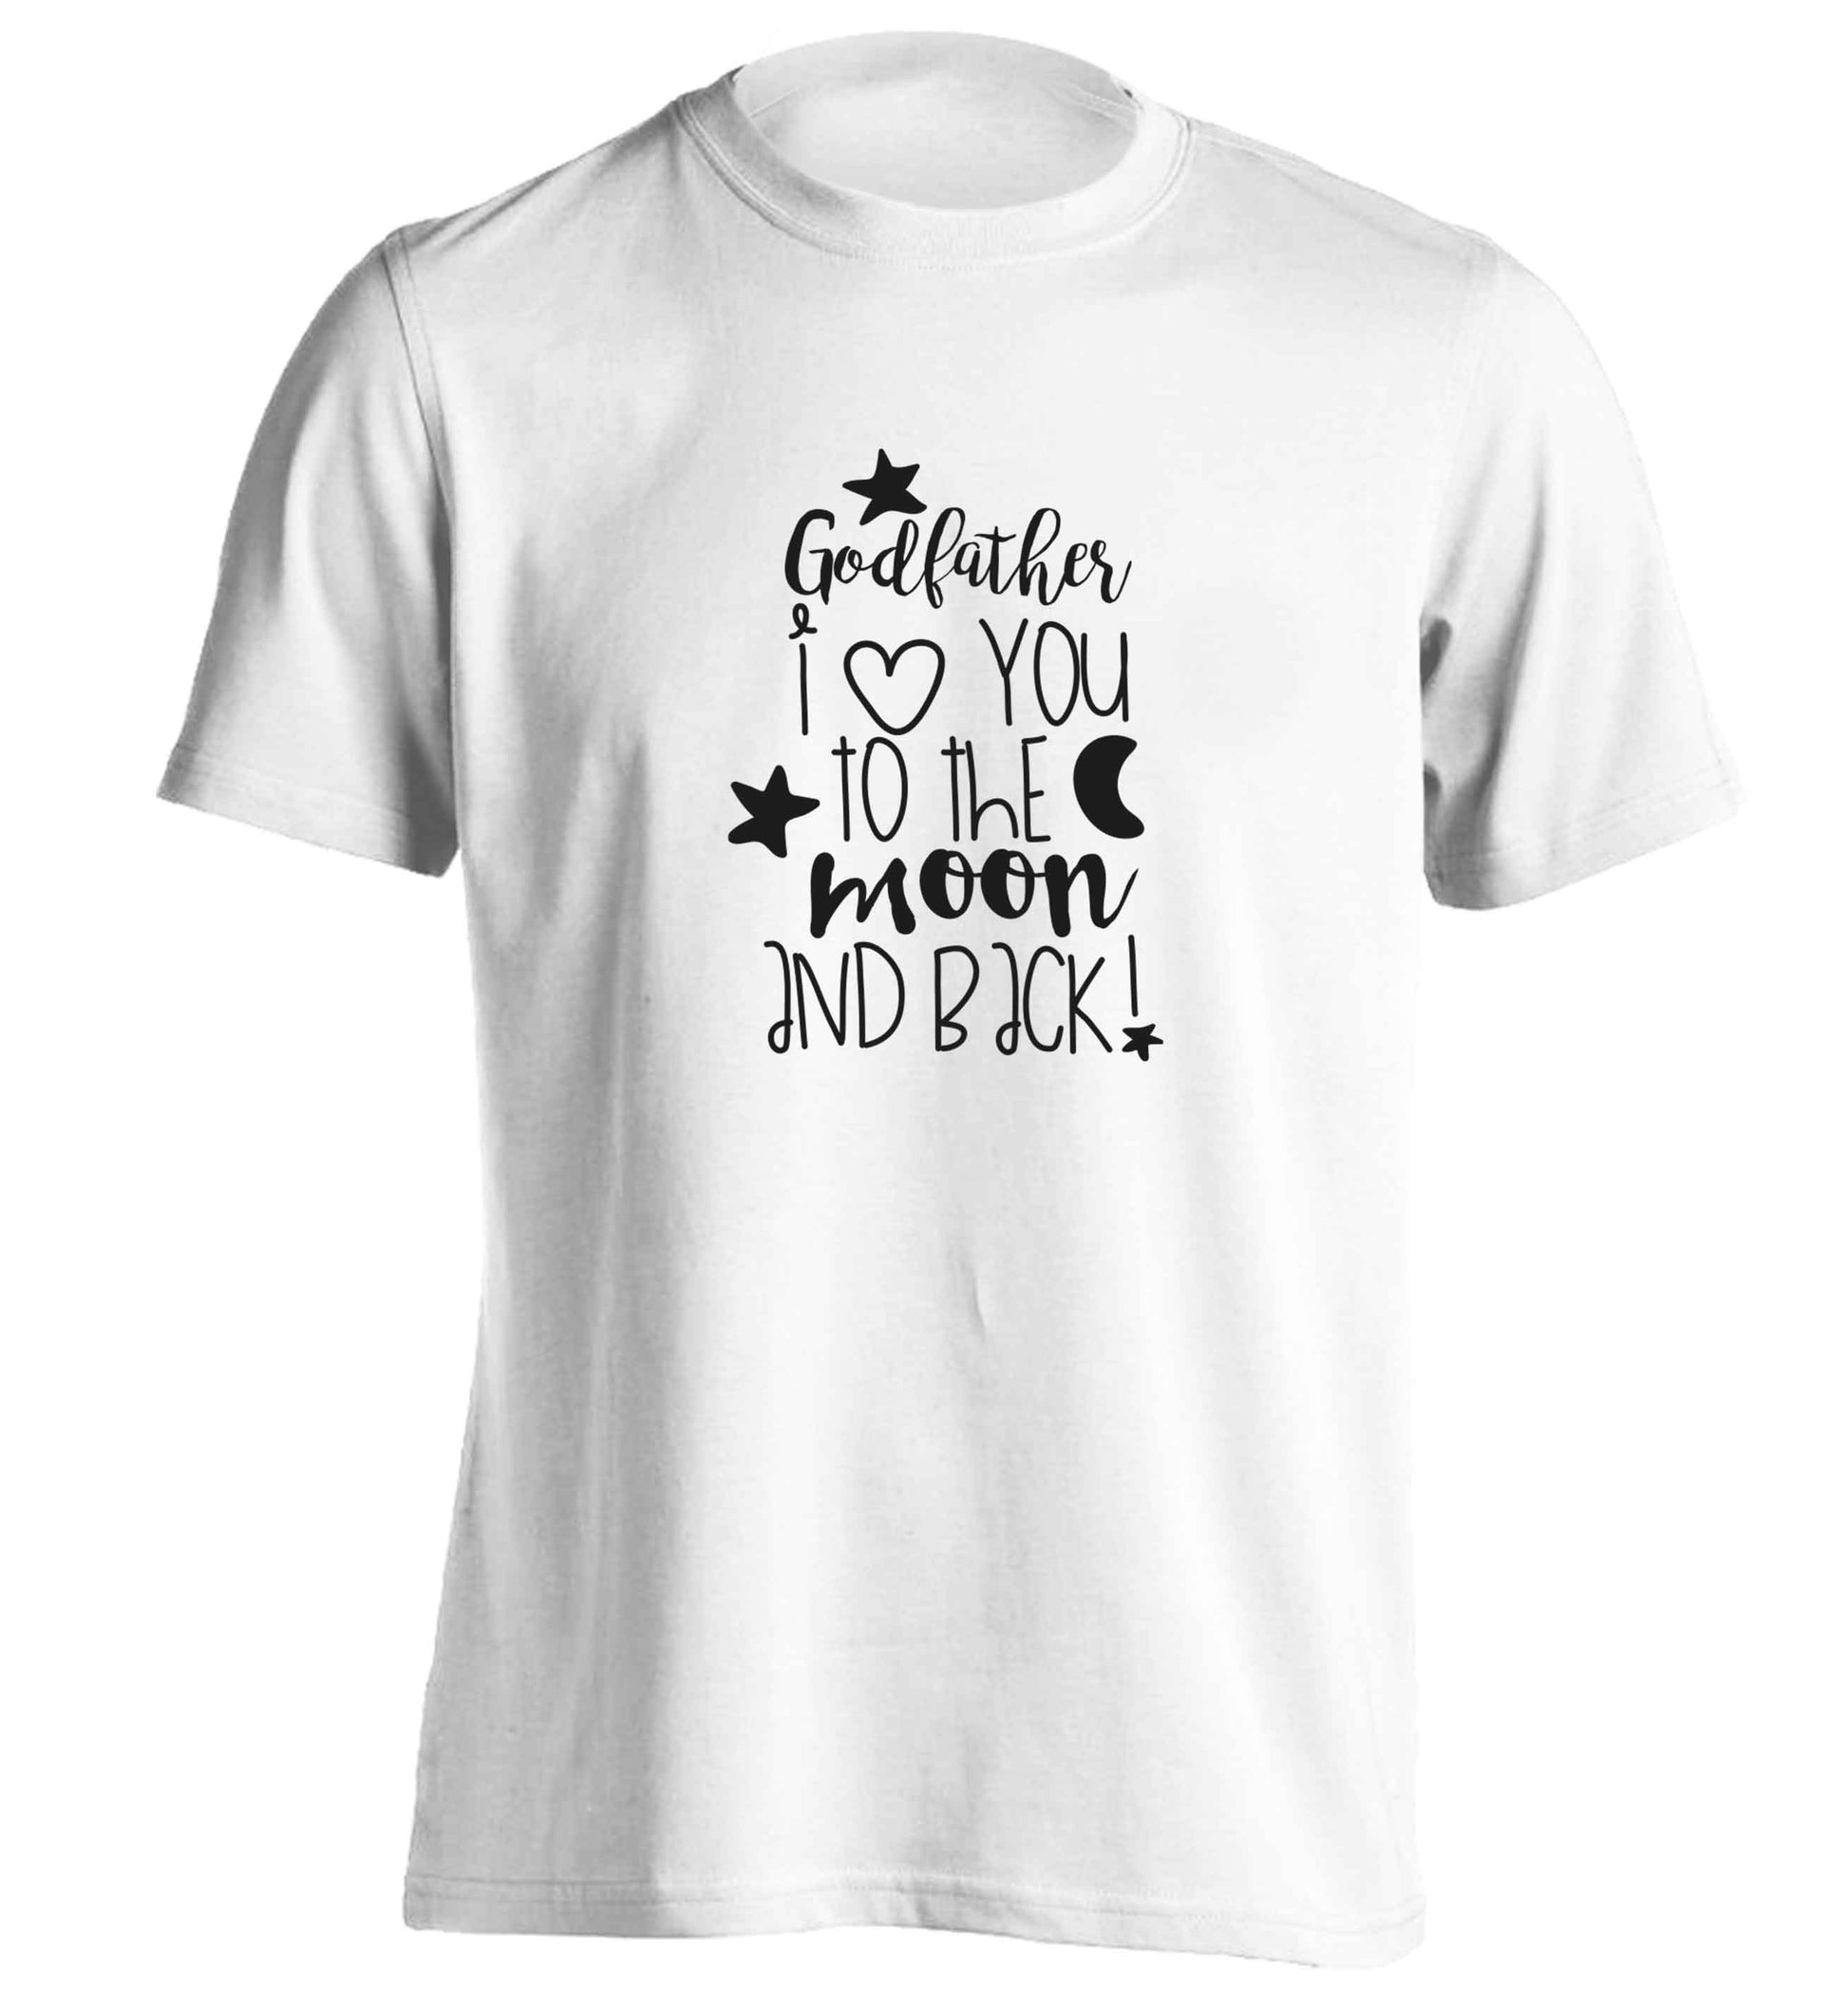 Godfather I love you to the moon and back adults unisex white Tshirt 2XL